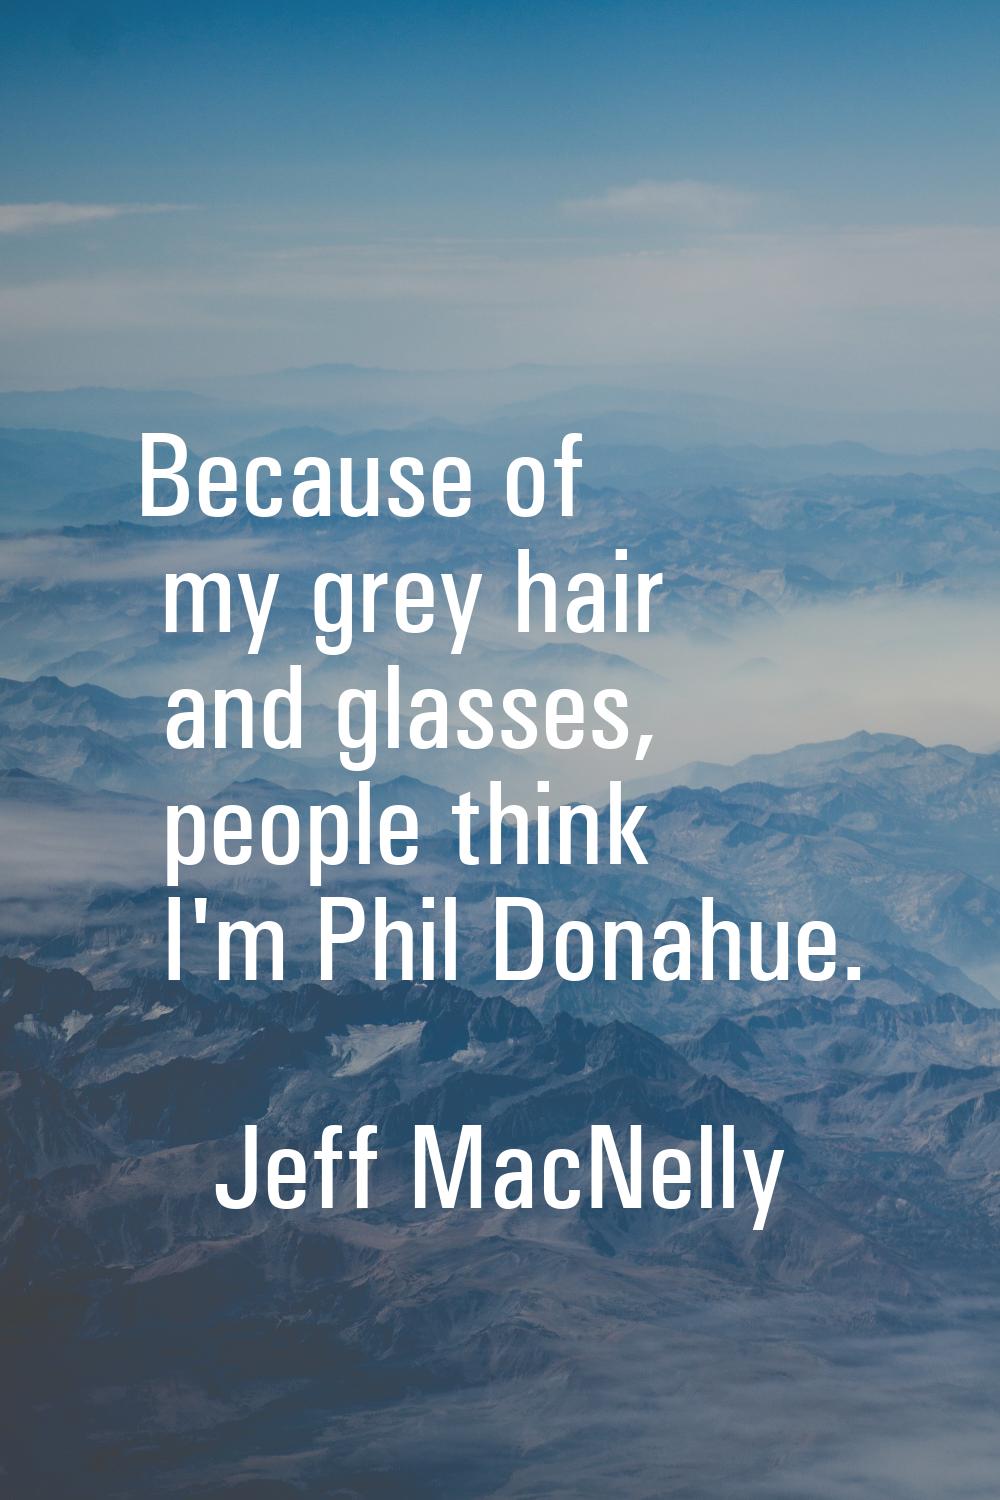 Because of my grey hair and glasses, people think I'm Phil Donahue.